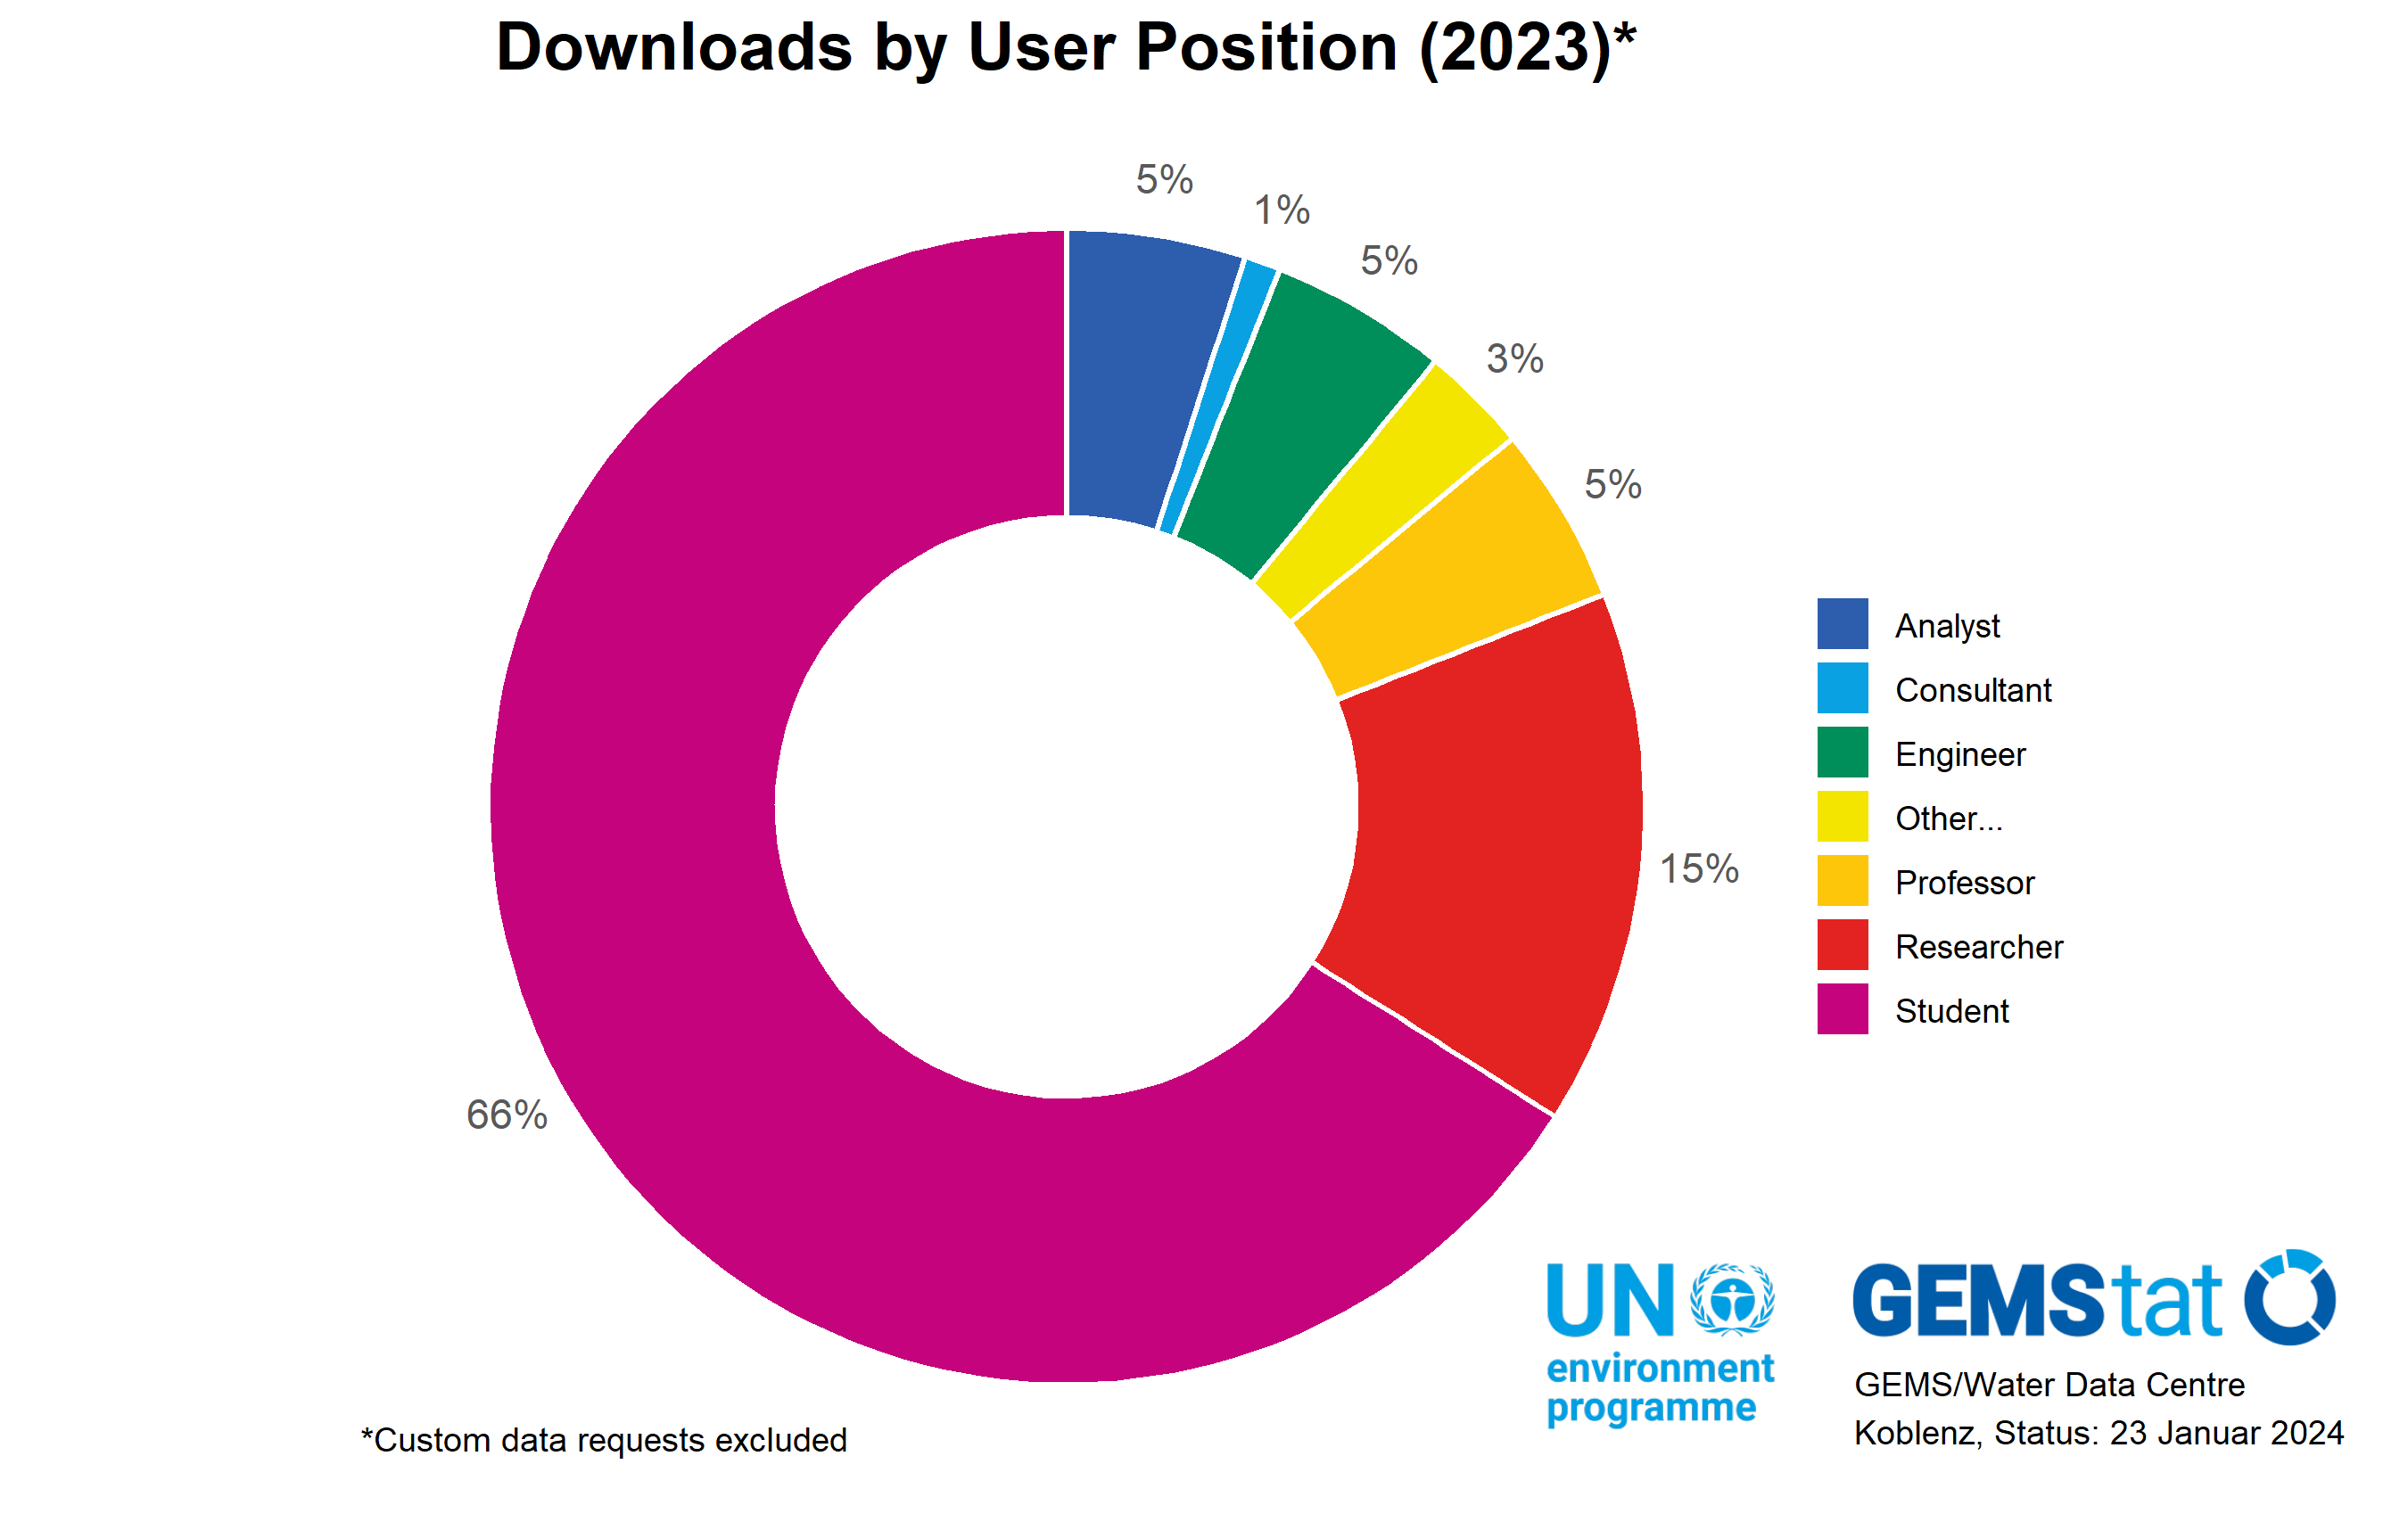 GEMStat data download by user profession in 2023